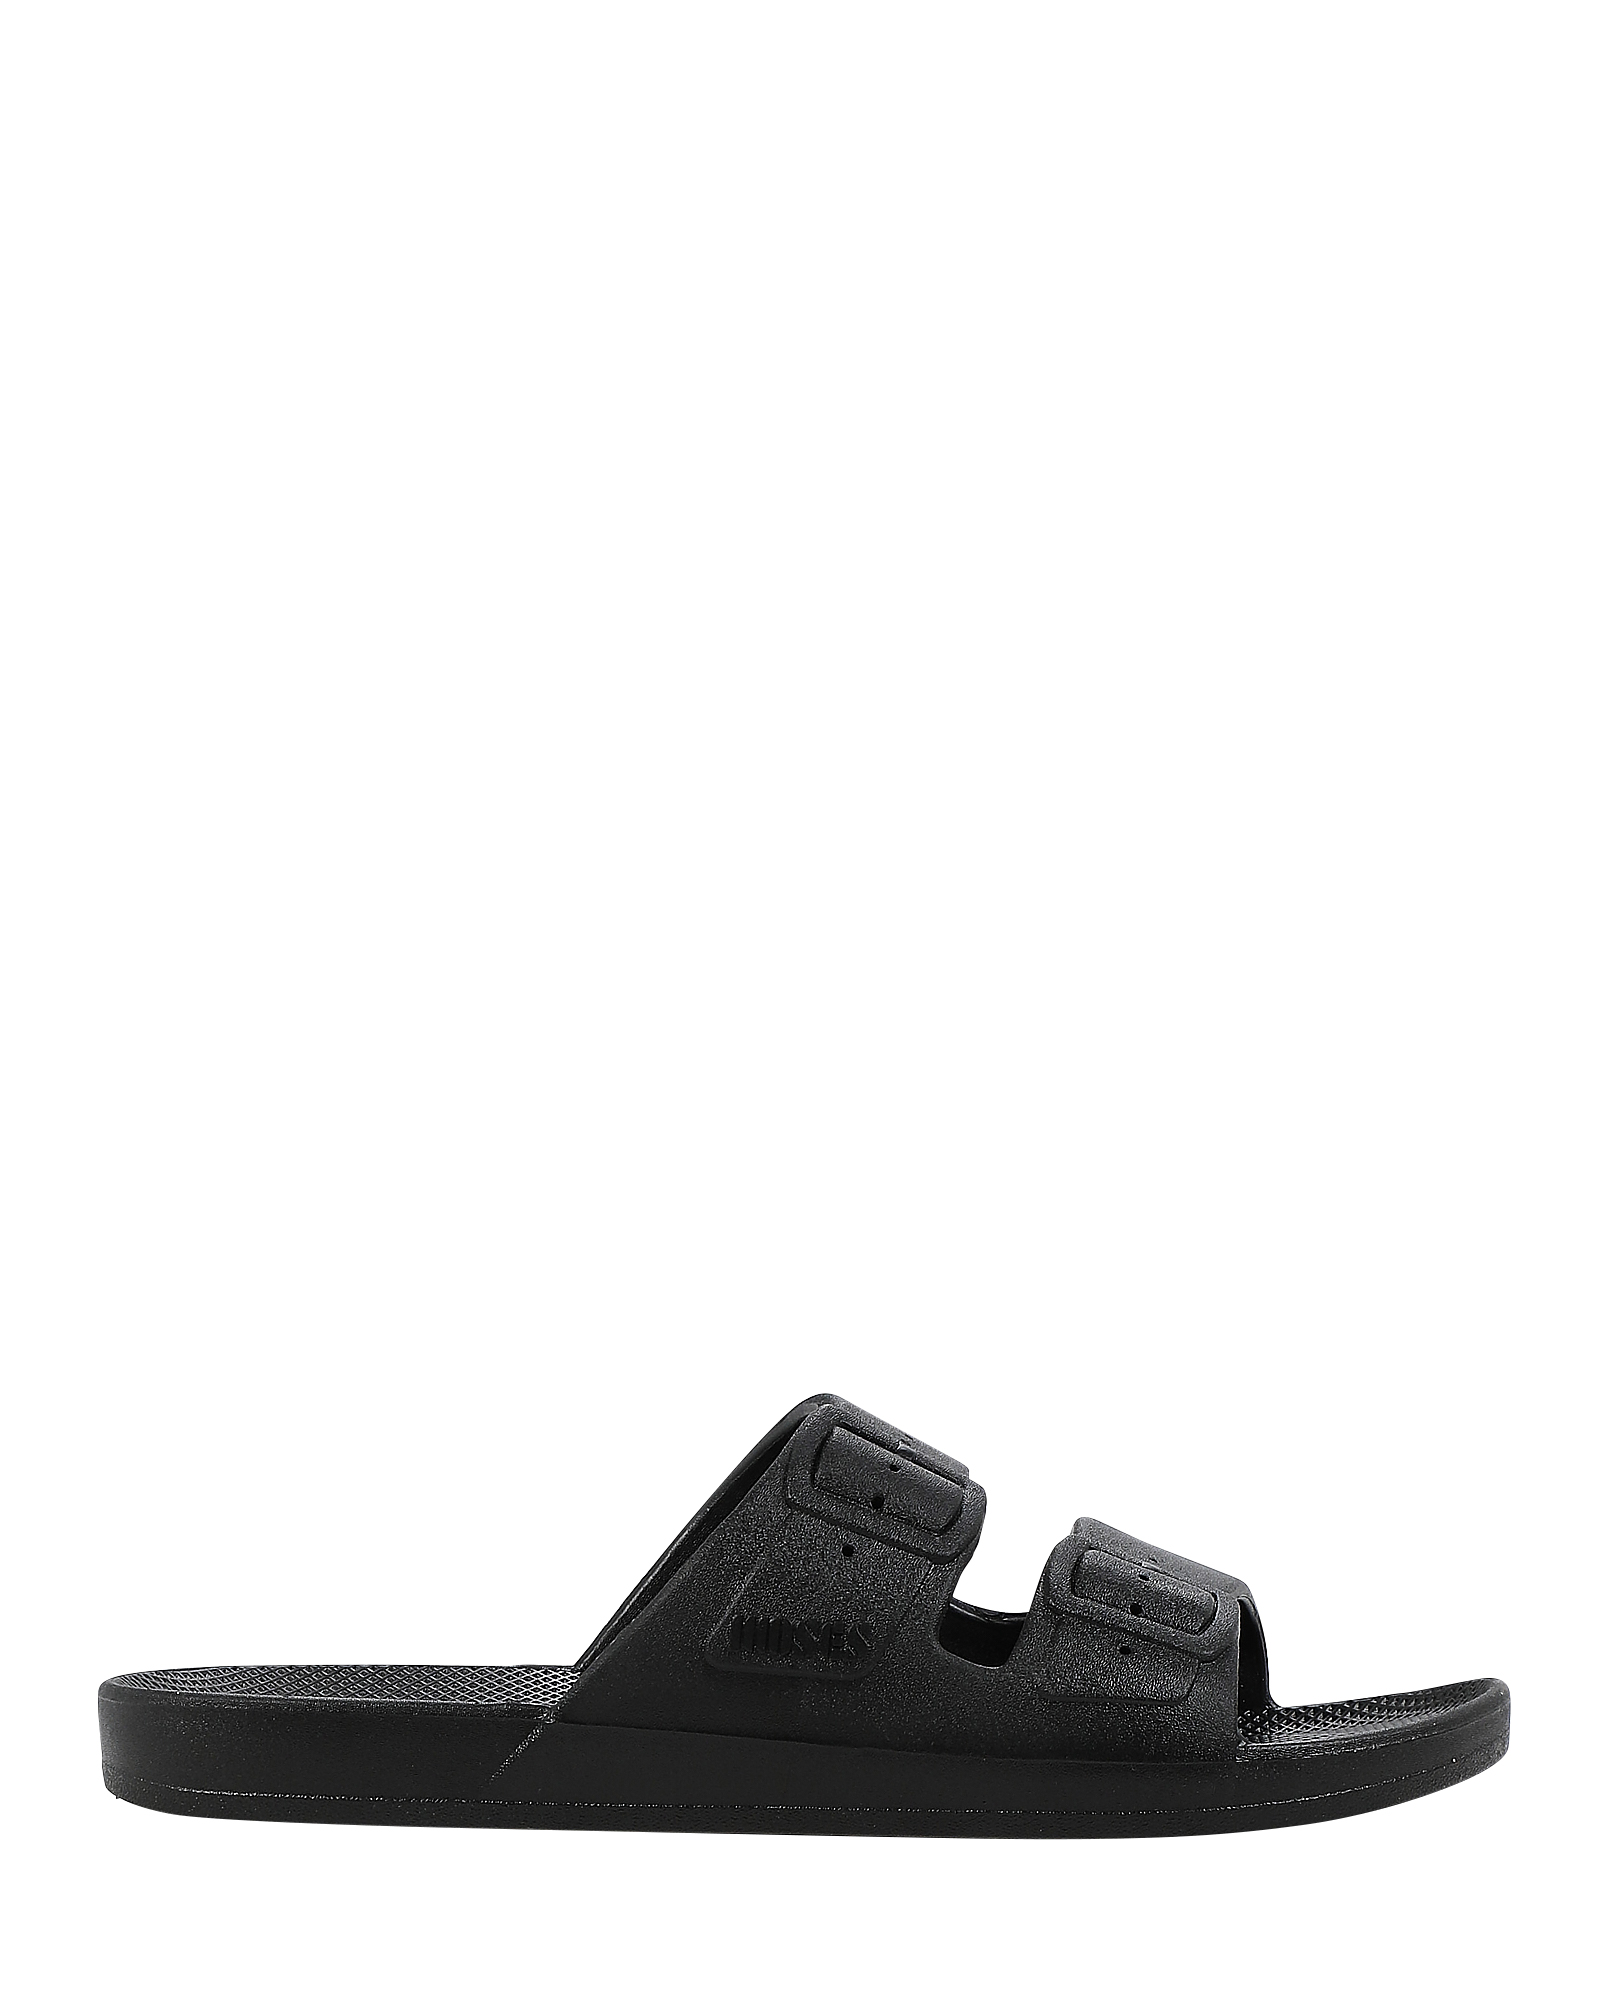 Freedom Moses Rubber Slides In Black | INTERMIX®